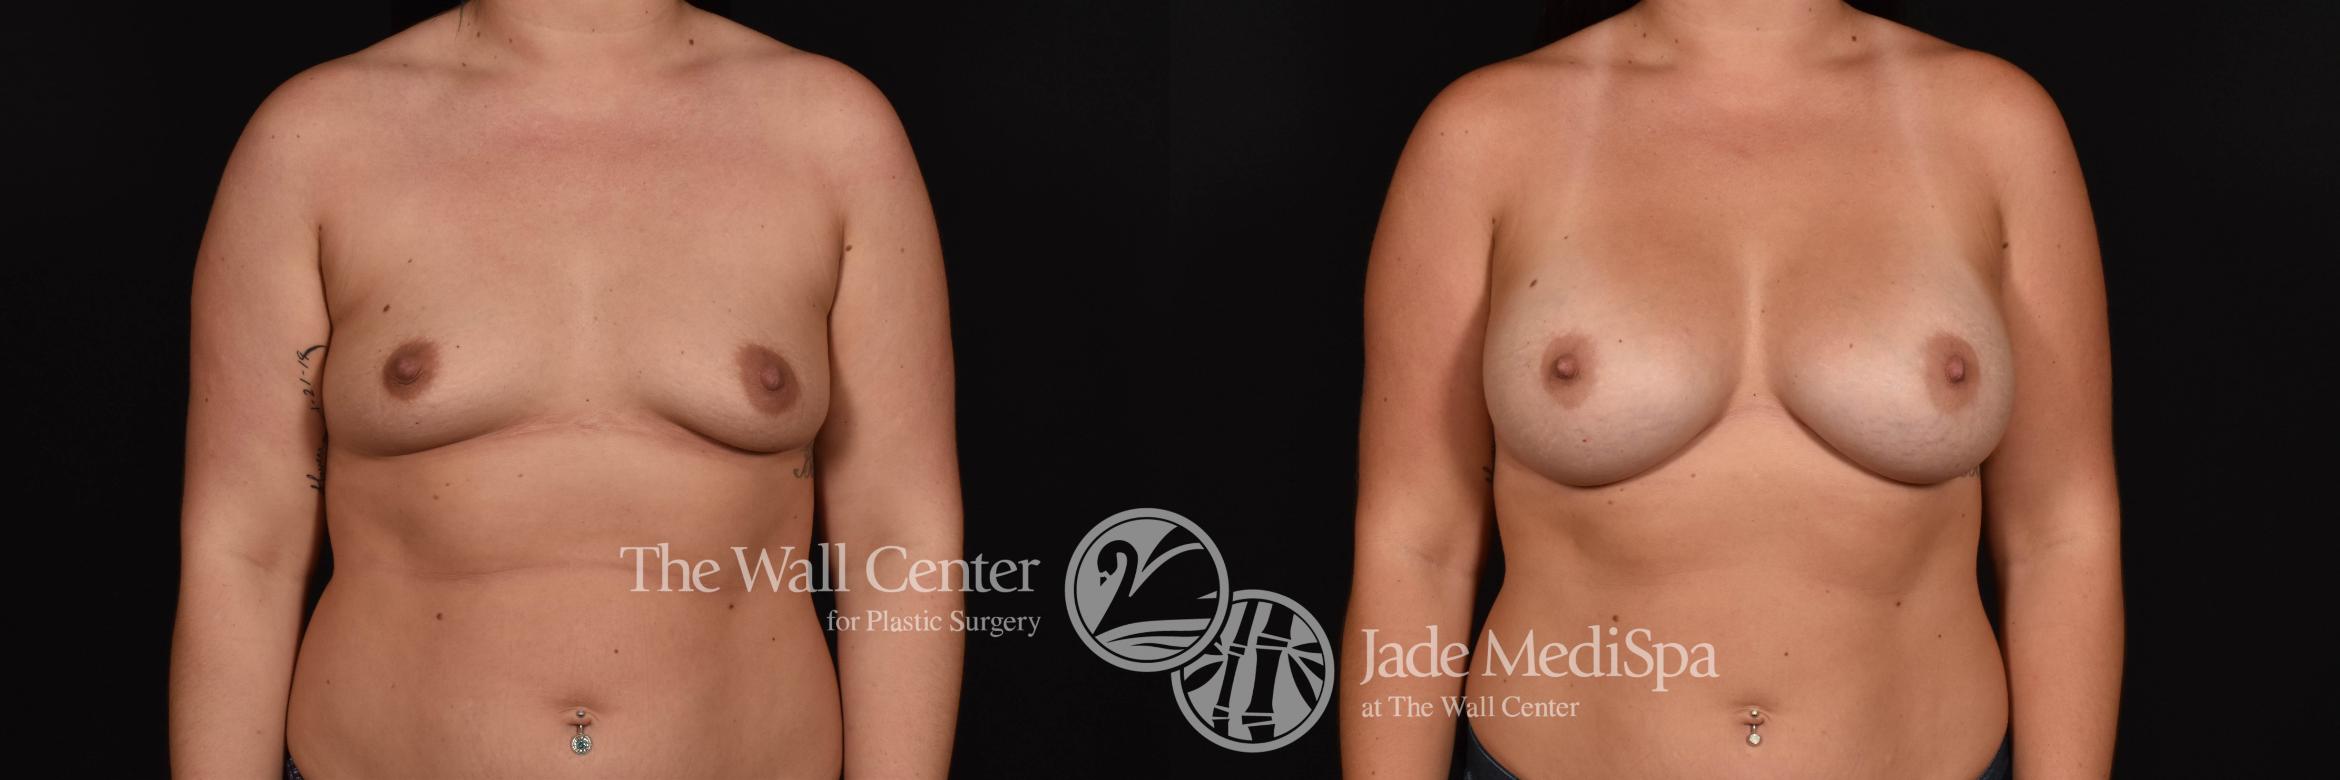 Breast Augmentation with SAFELipo Front Photo, Shreveport, Louisiana, The Wall Center for Plastic Surgery, Case 847